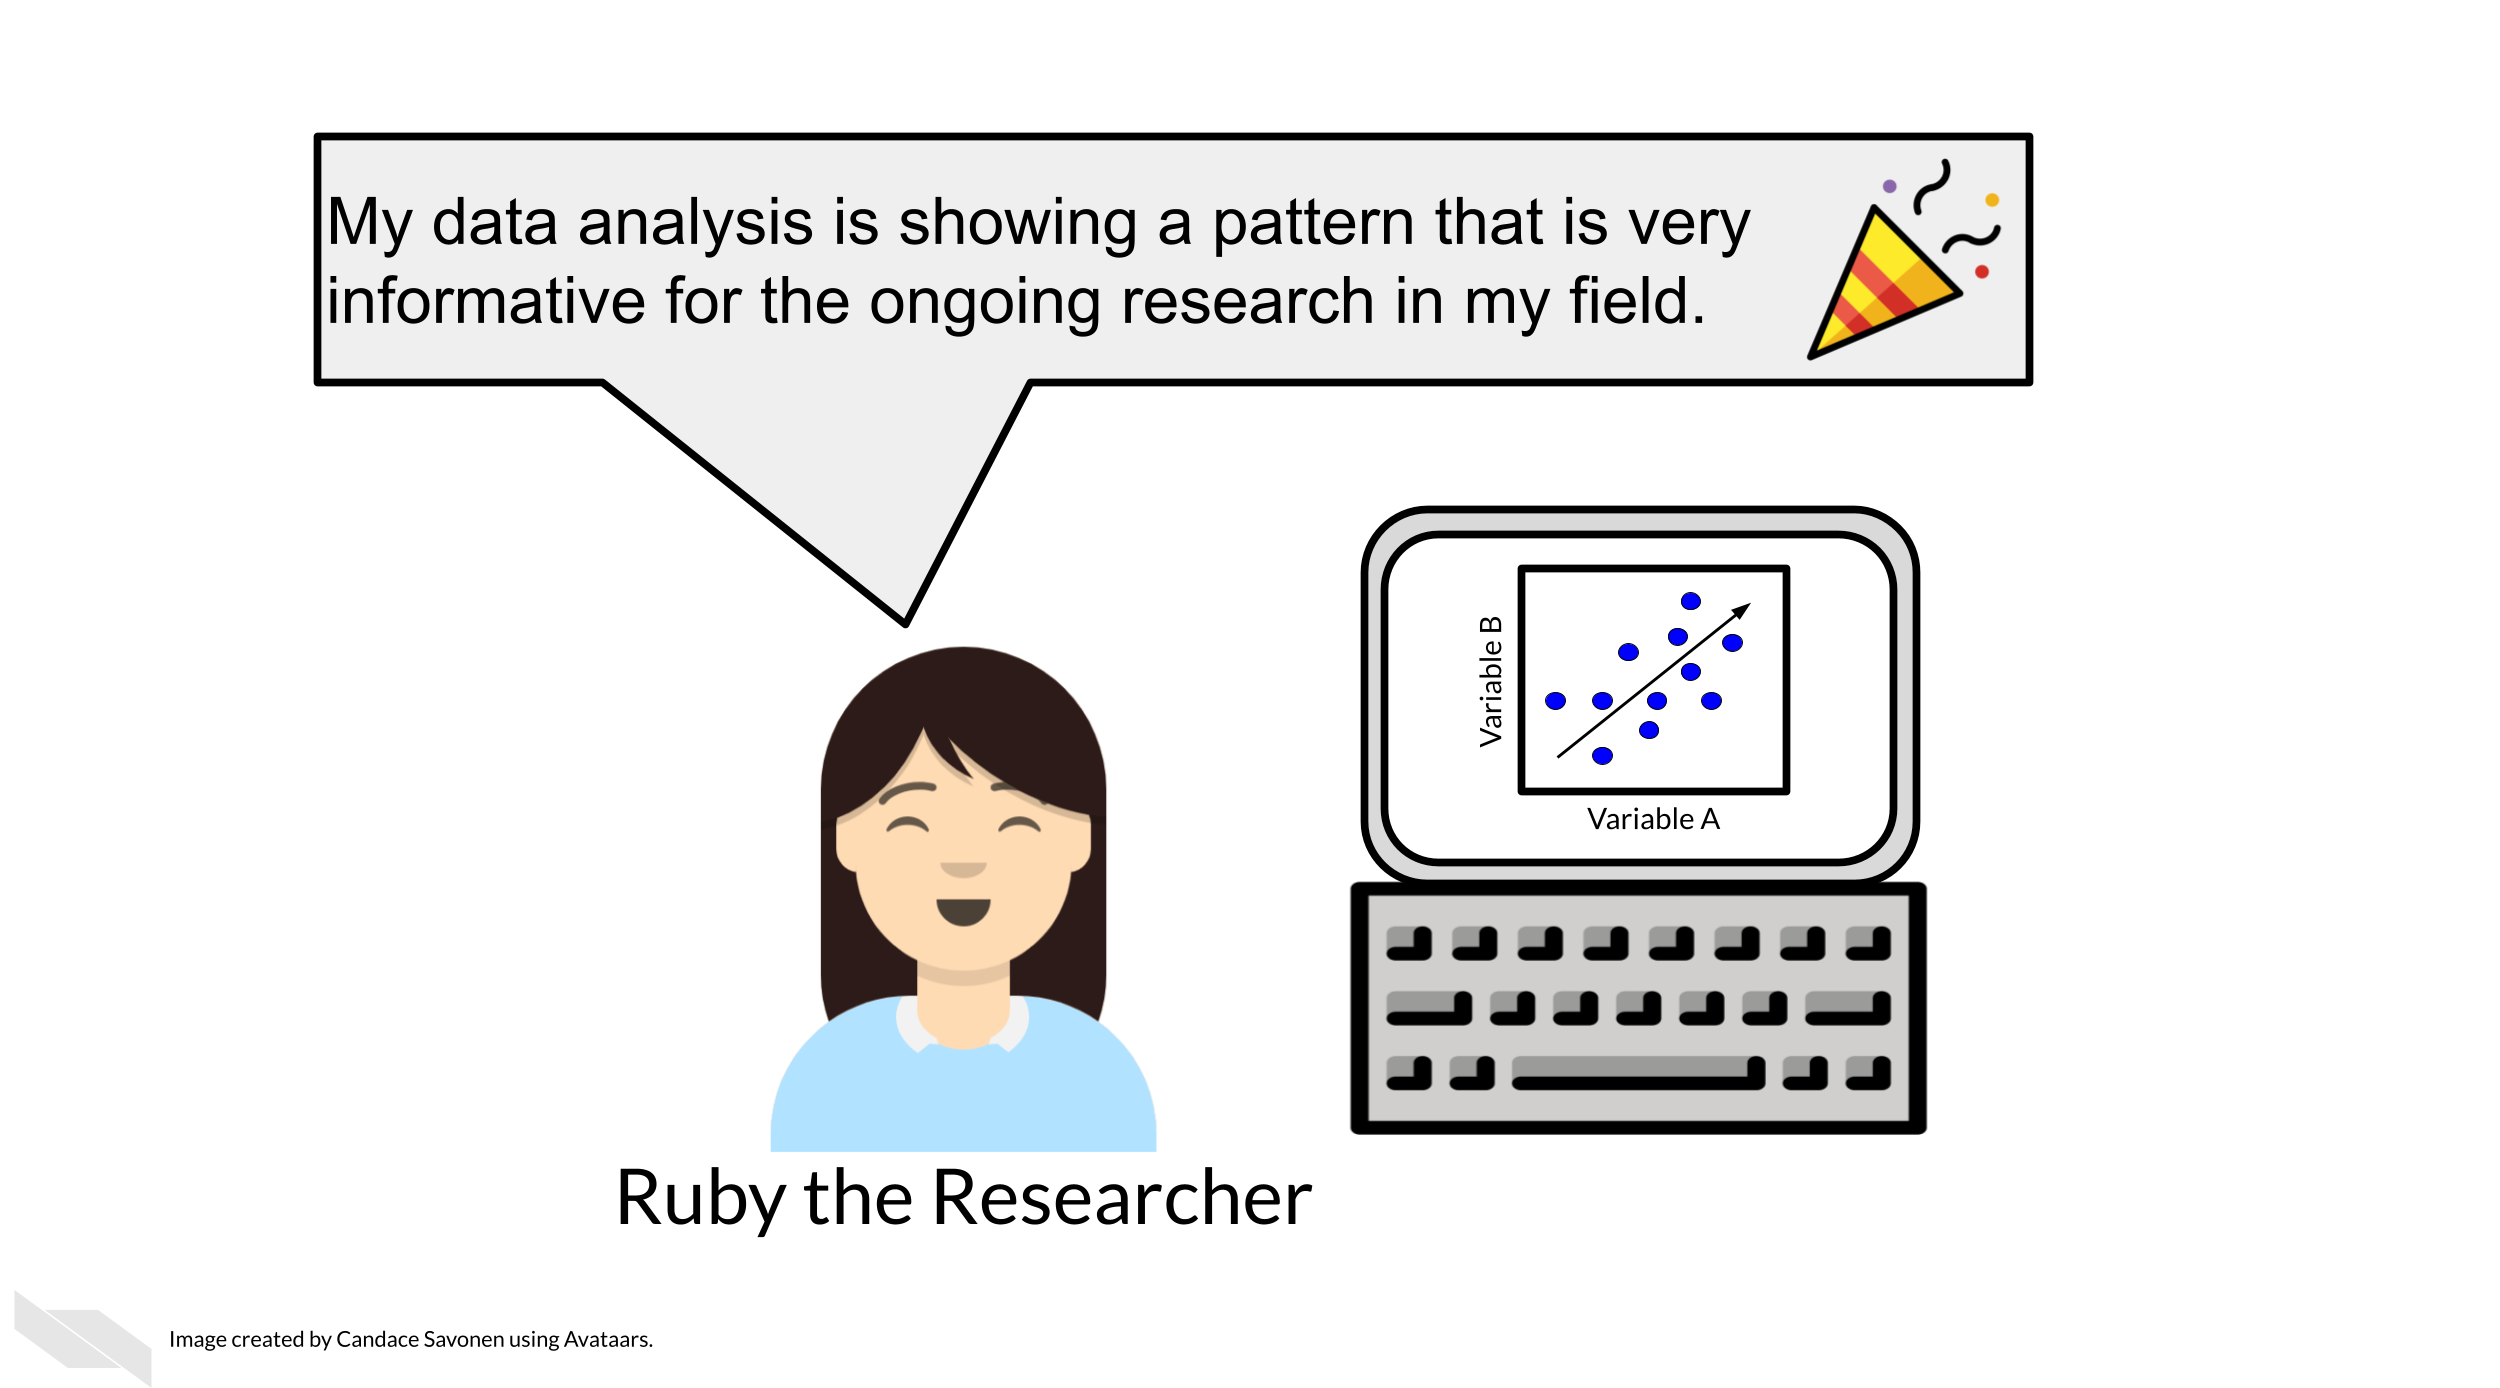 Ruby the researcher has found something very interesting through data analysis. Ruby has a scatterplot on her computer that shows blue and pink data points and a trendline. The scatterplot has Variable A on the x axis and Variable B on the y axis. Ruby says my data analysis is showing a pattern that is very informative for ongoing research in my field.